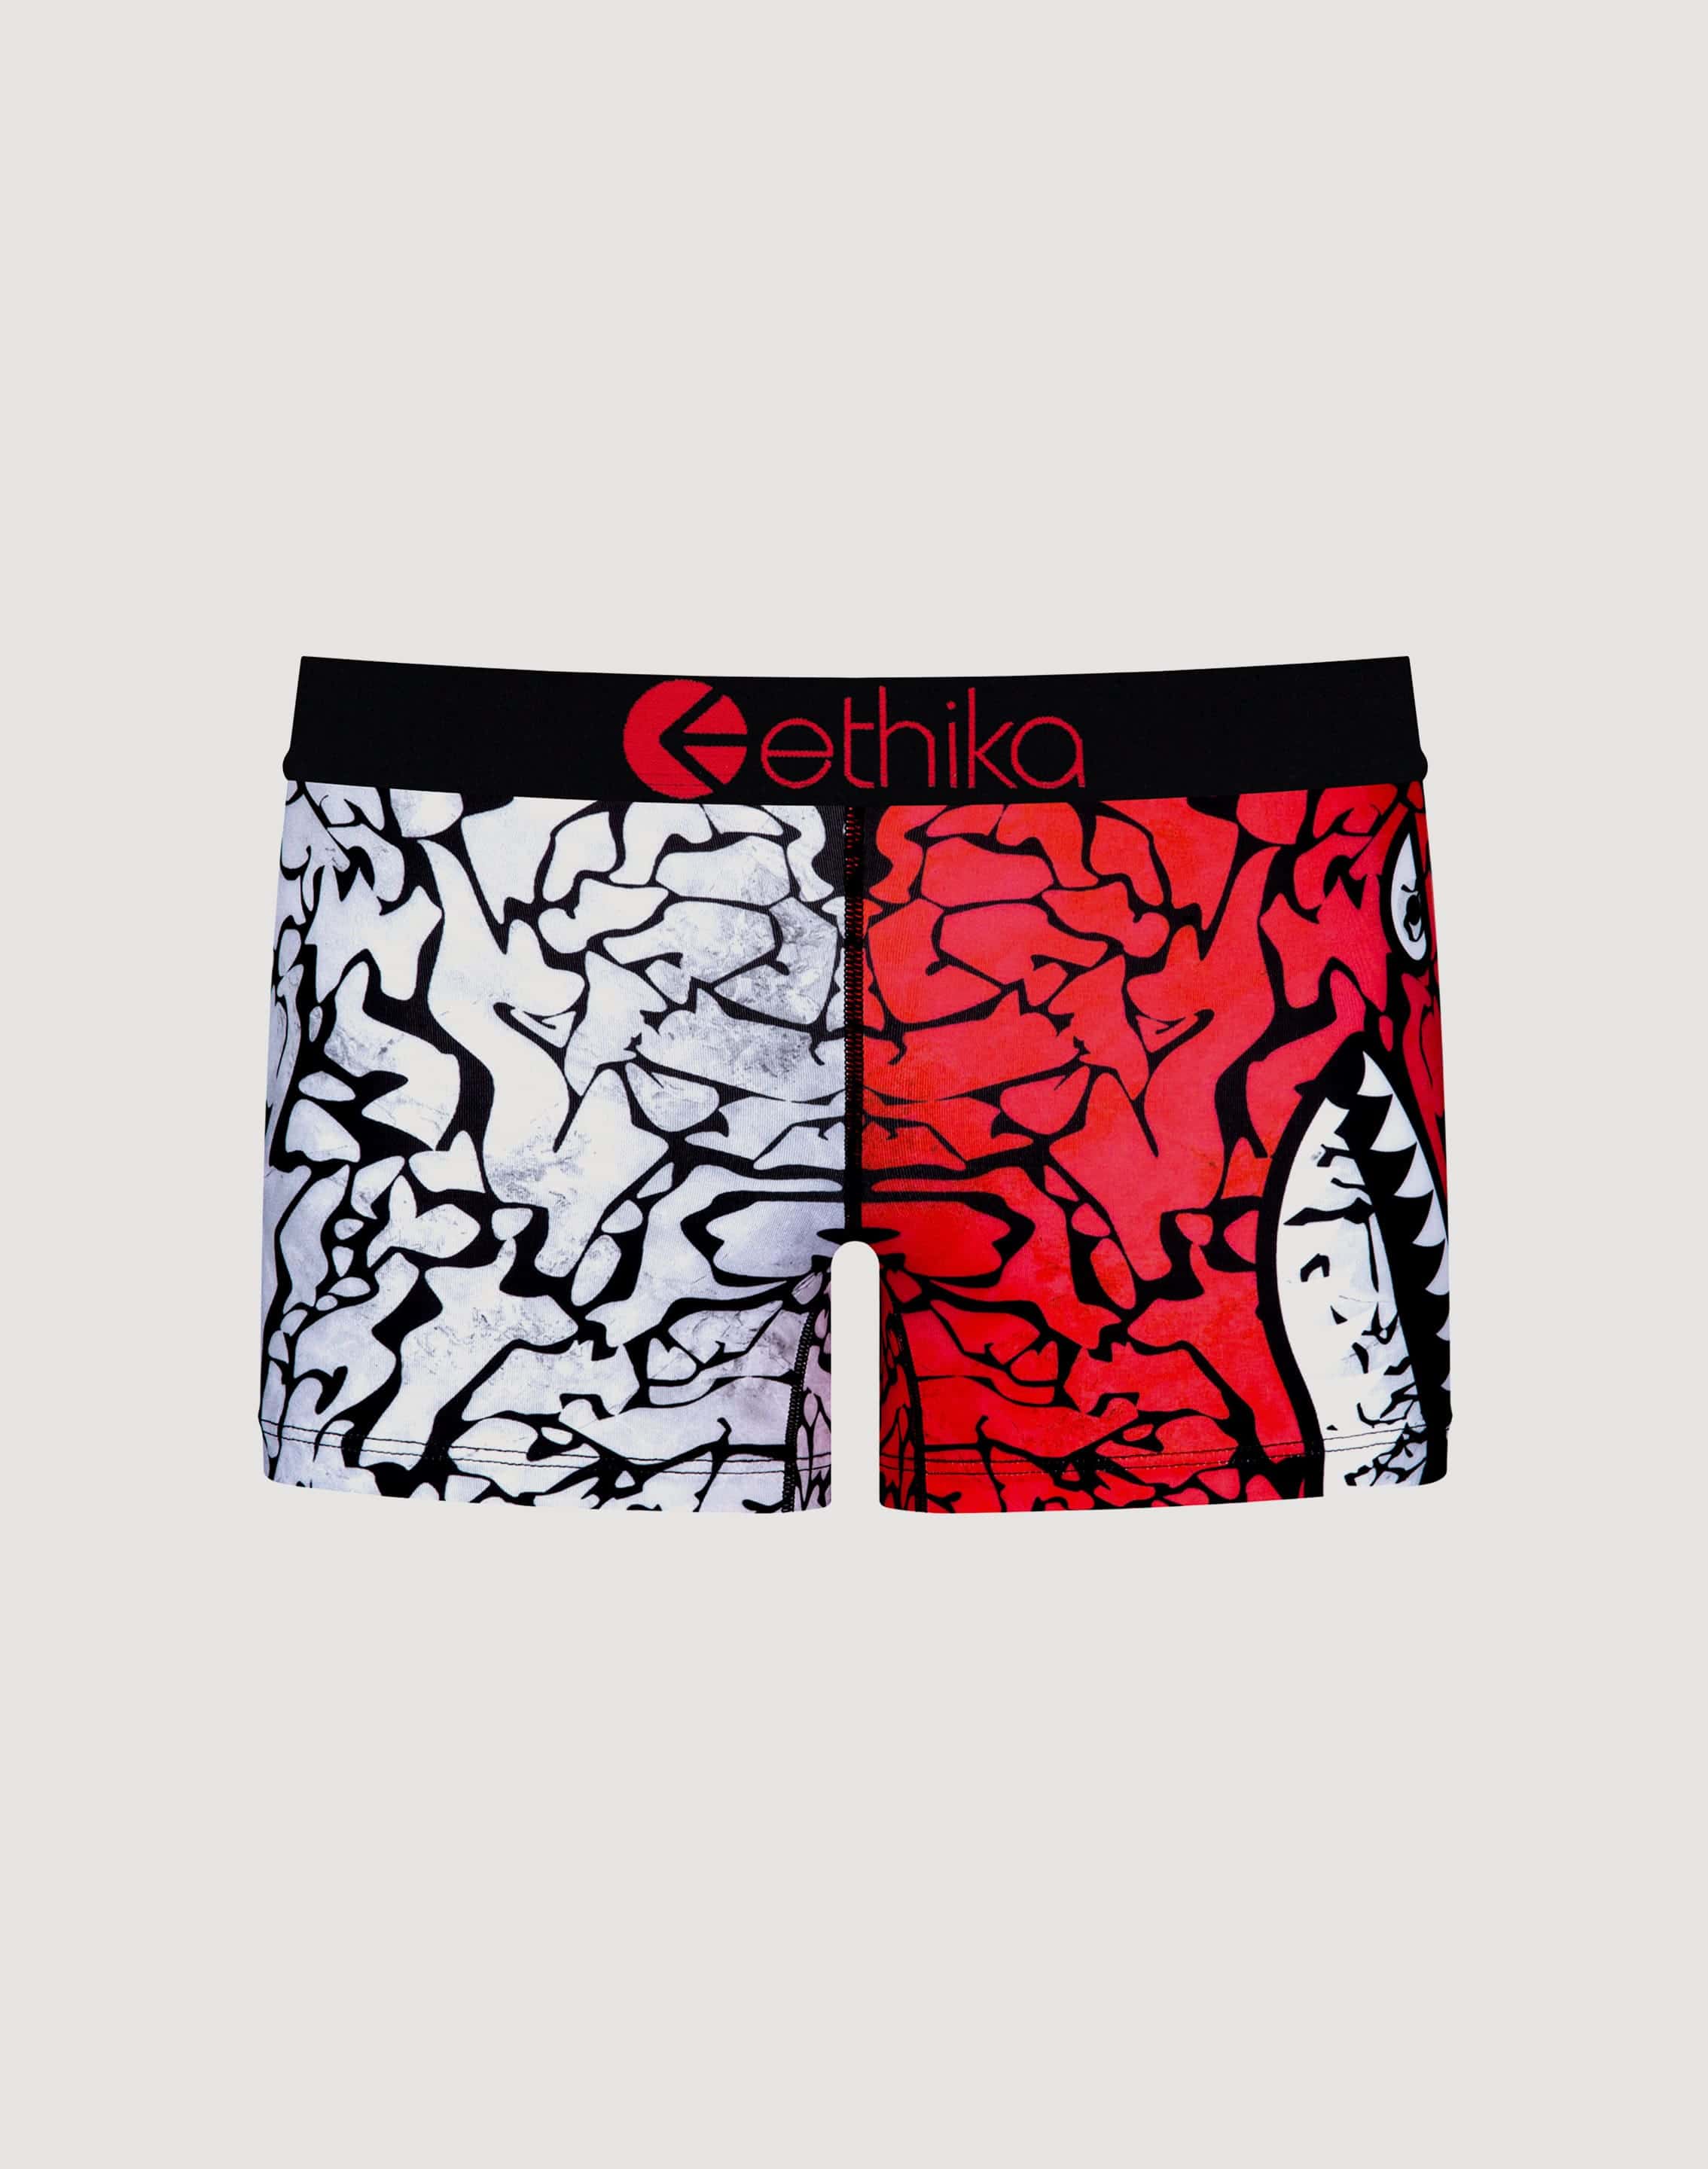 Ethika Sets for sale in Louisville, Kentucky, Facebook Marketplace